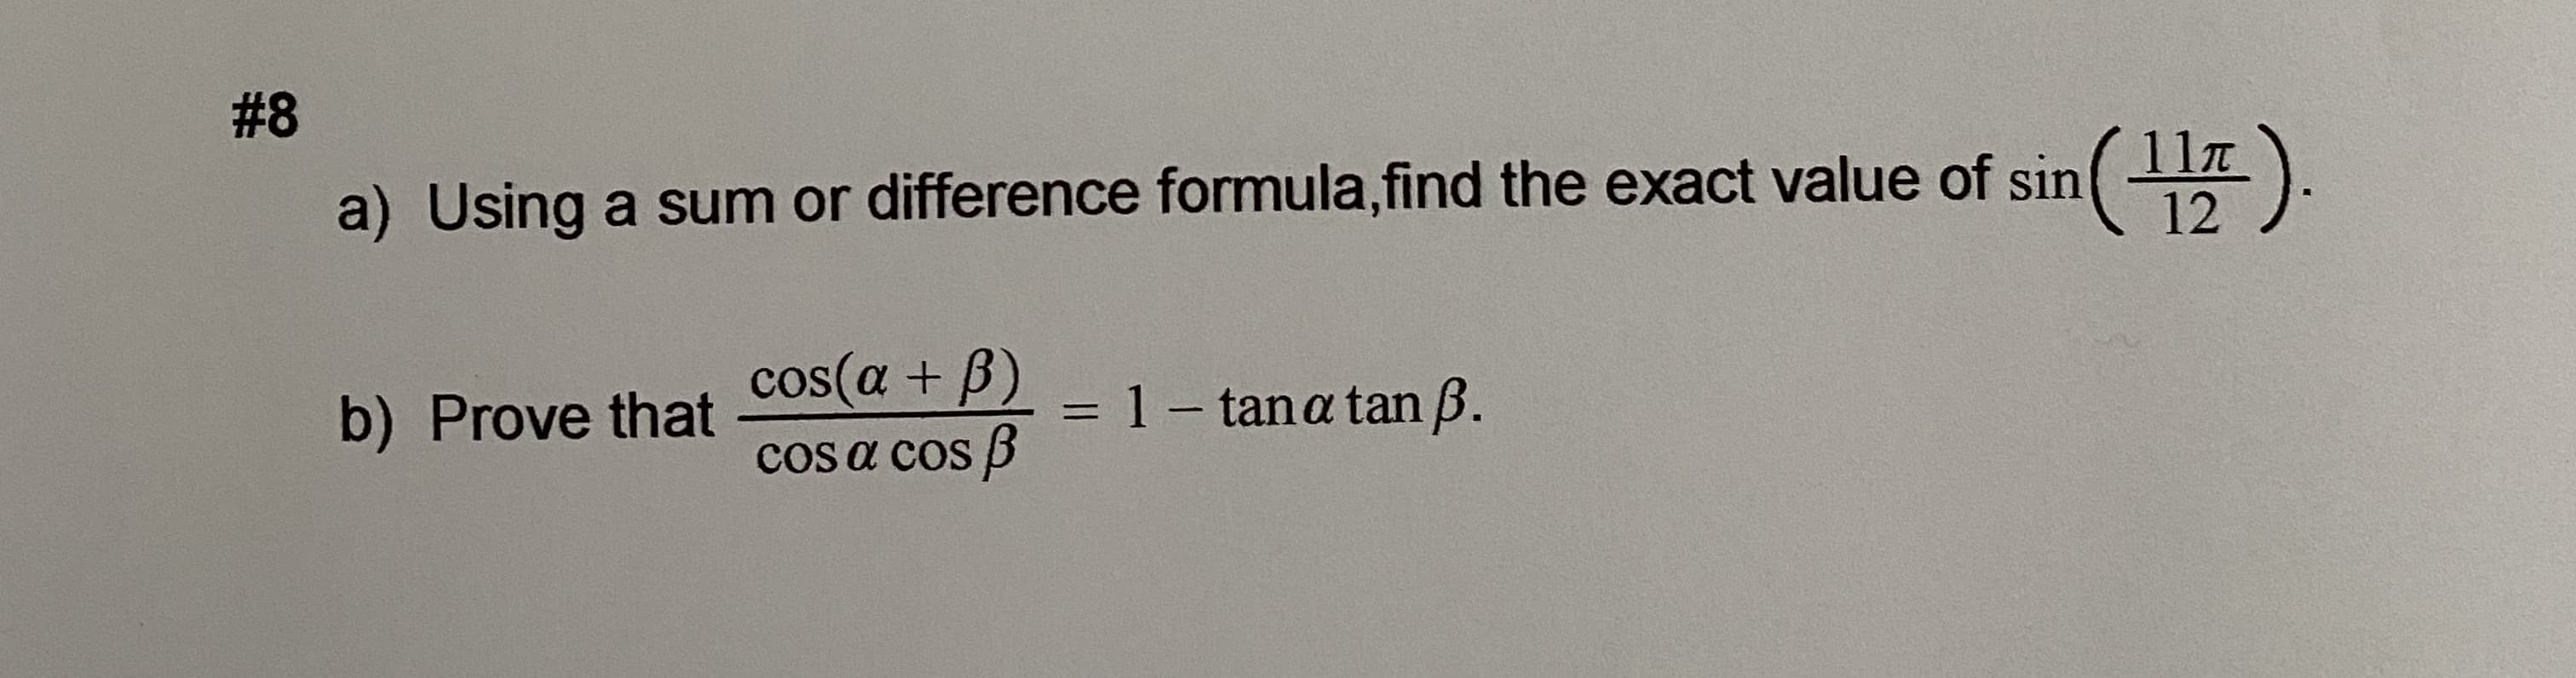 ().
11T
12
a) Using a sum or difference formula,find the exact value of sin
cos(a + B)
= 1- tana tan ß.
b) Prove that
COs a cos B
